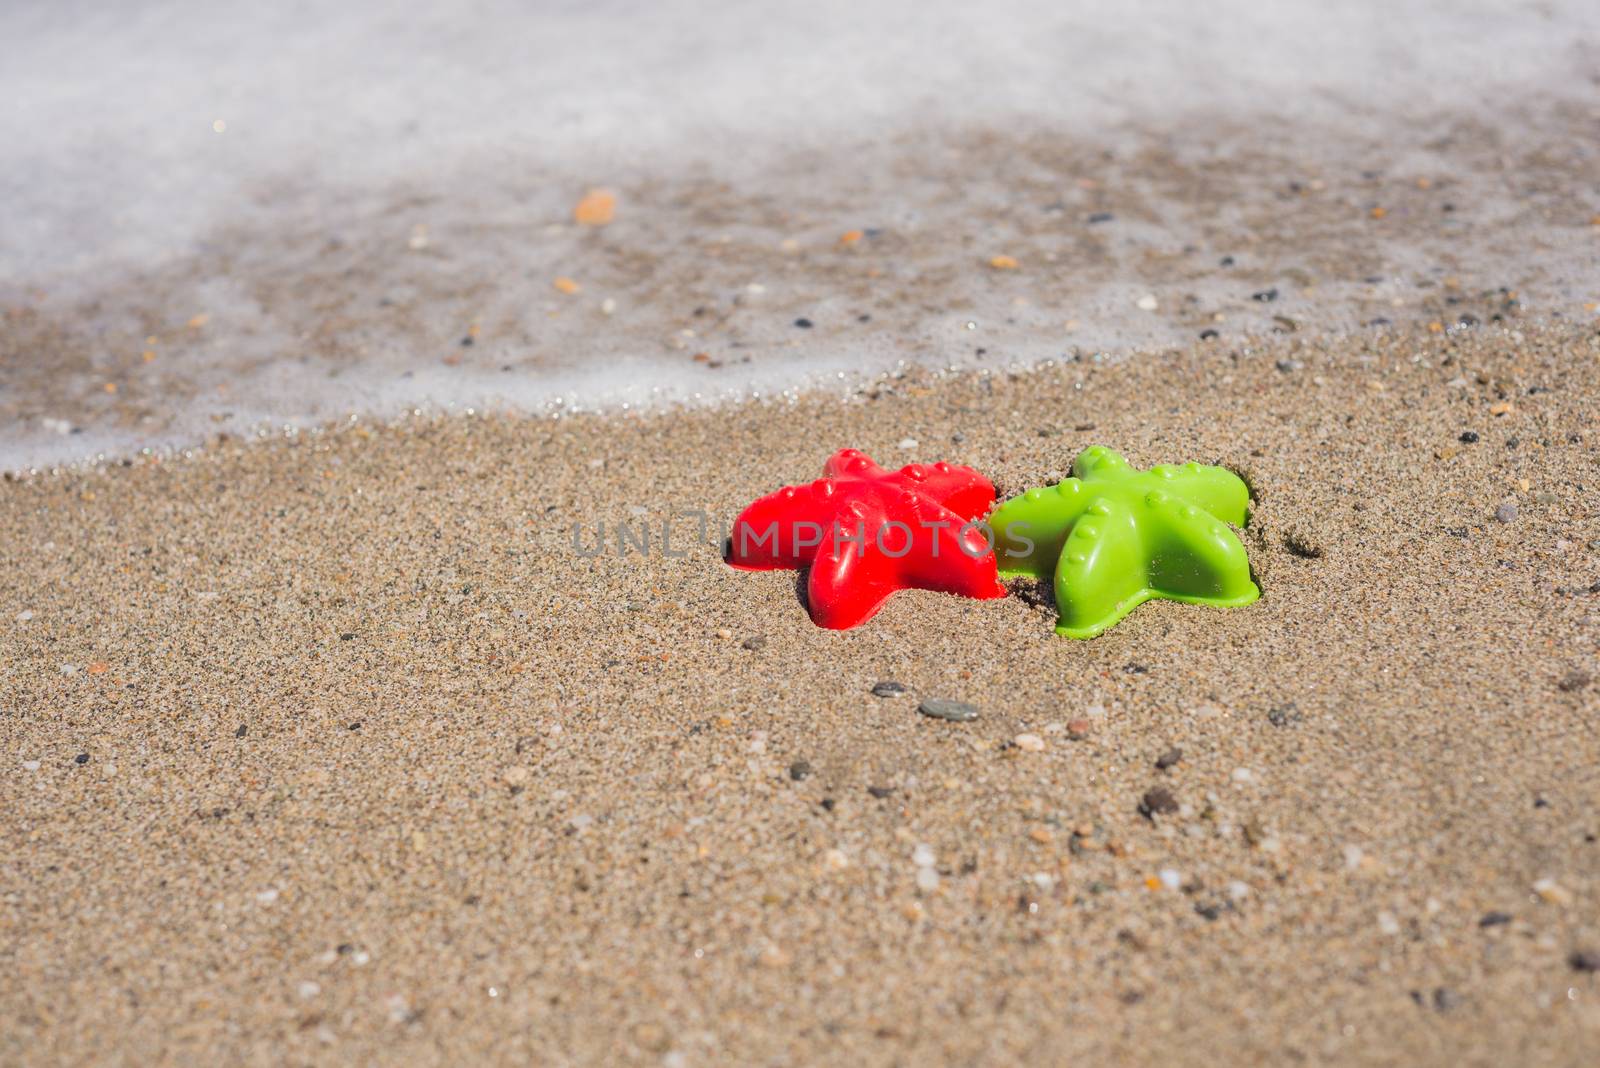 Two starfish-shaped molds on the sand by anytka